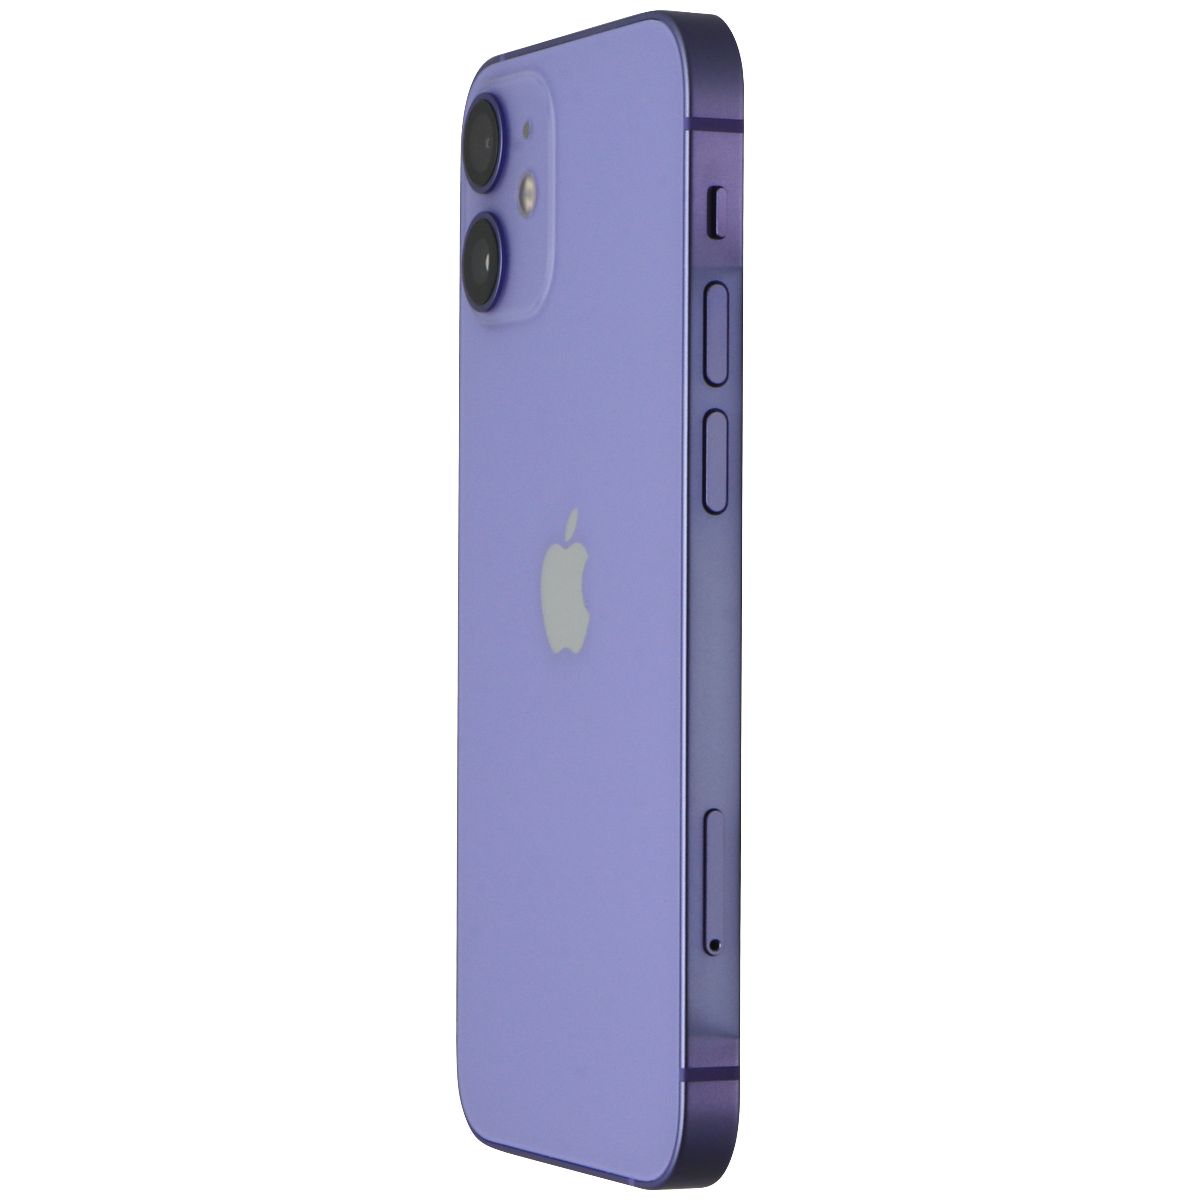 Apple iPhone 12 mini (5.4-inch) Smartphone (A2176) Verizon Only - 64GB/Purple Cell Phones & Smartphones Apple    - Simple Cell Bulk Wholesale Pricing - USA Seller